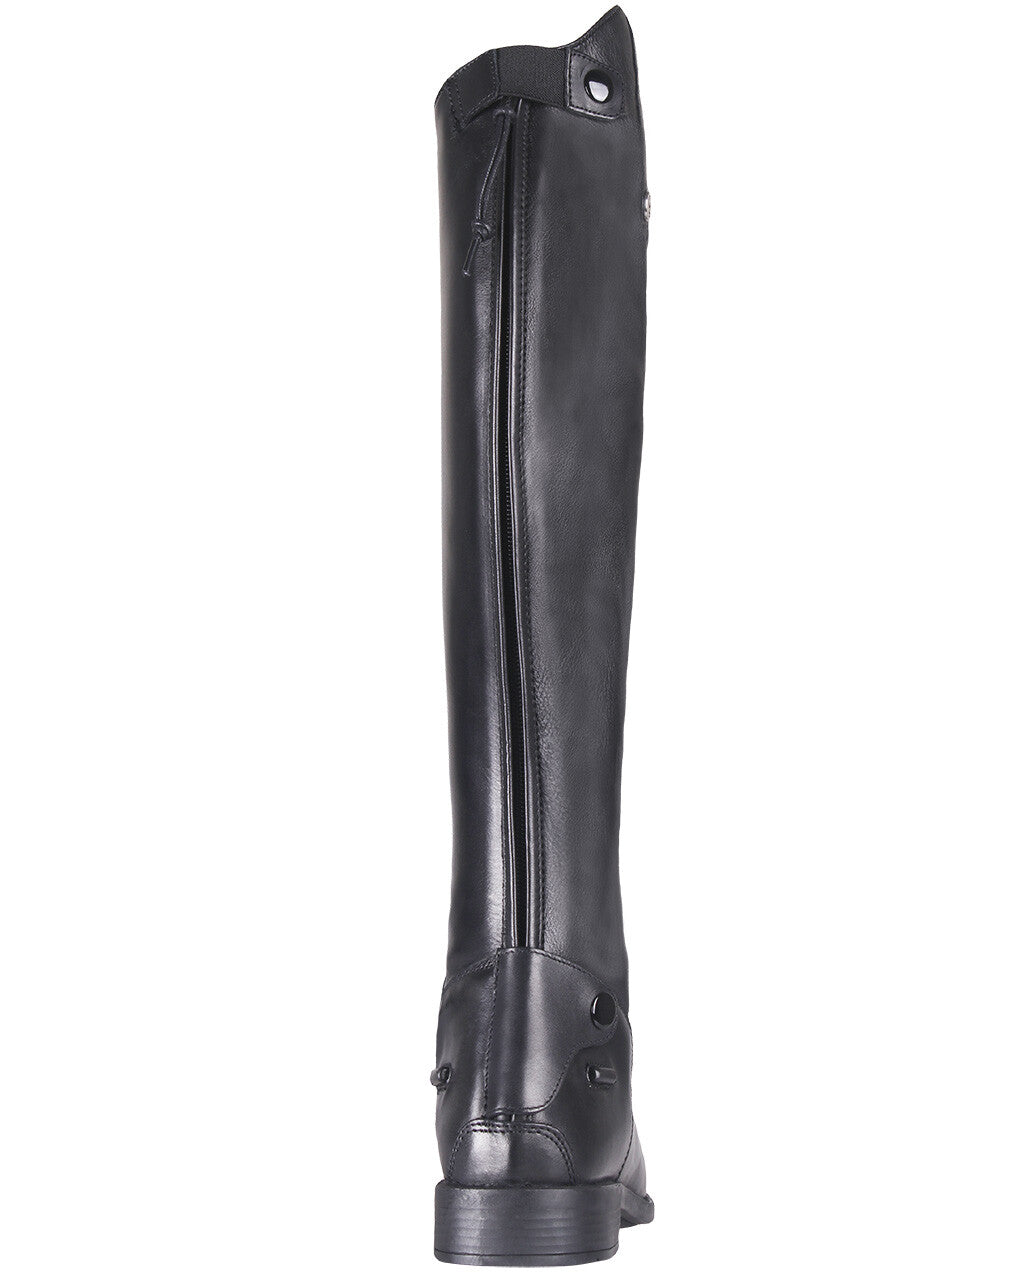 QHP Riding boot Birgit Adult Extra Wide